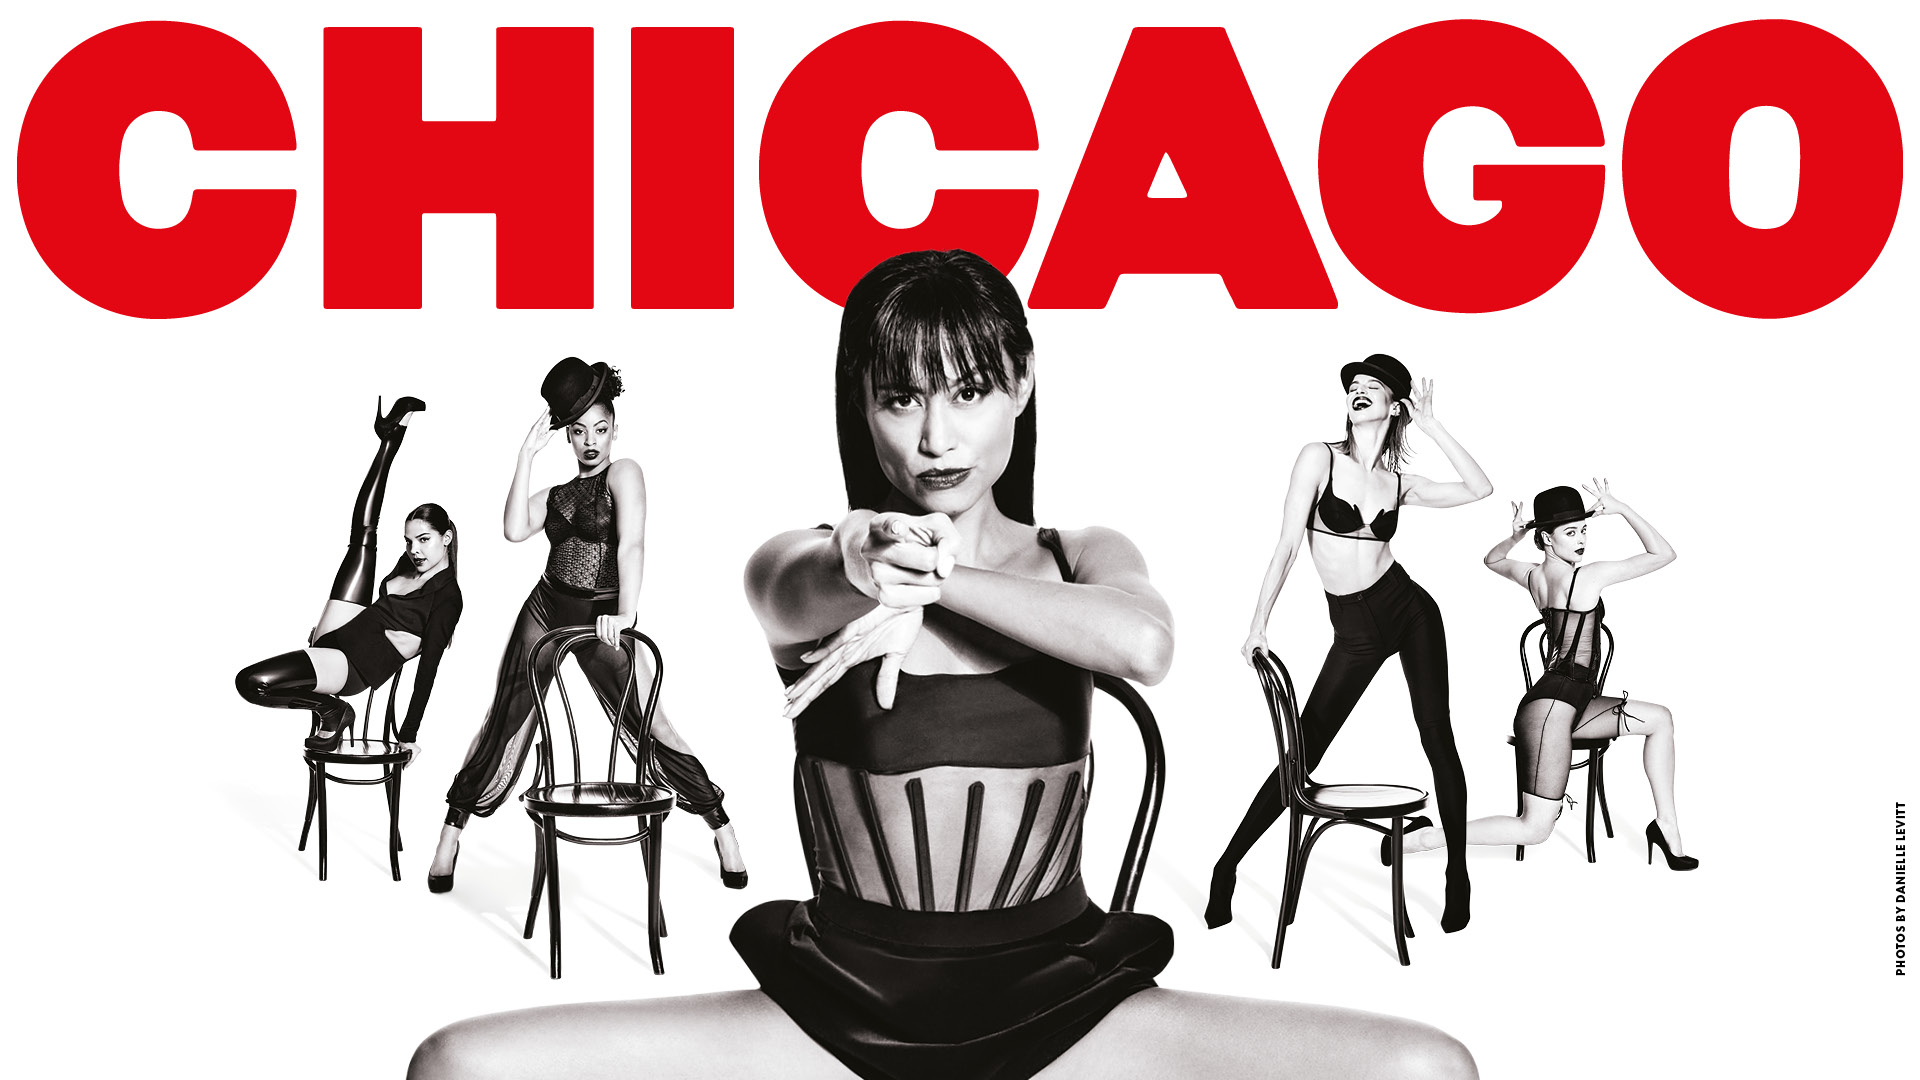 Women pose seductively in black and white image with the word CHICAGO